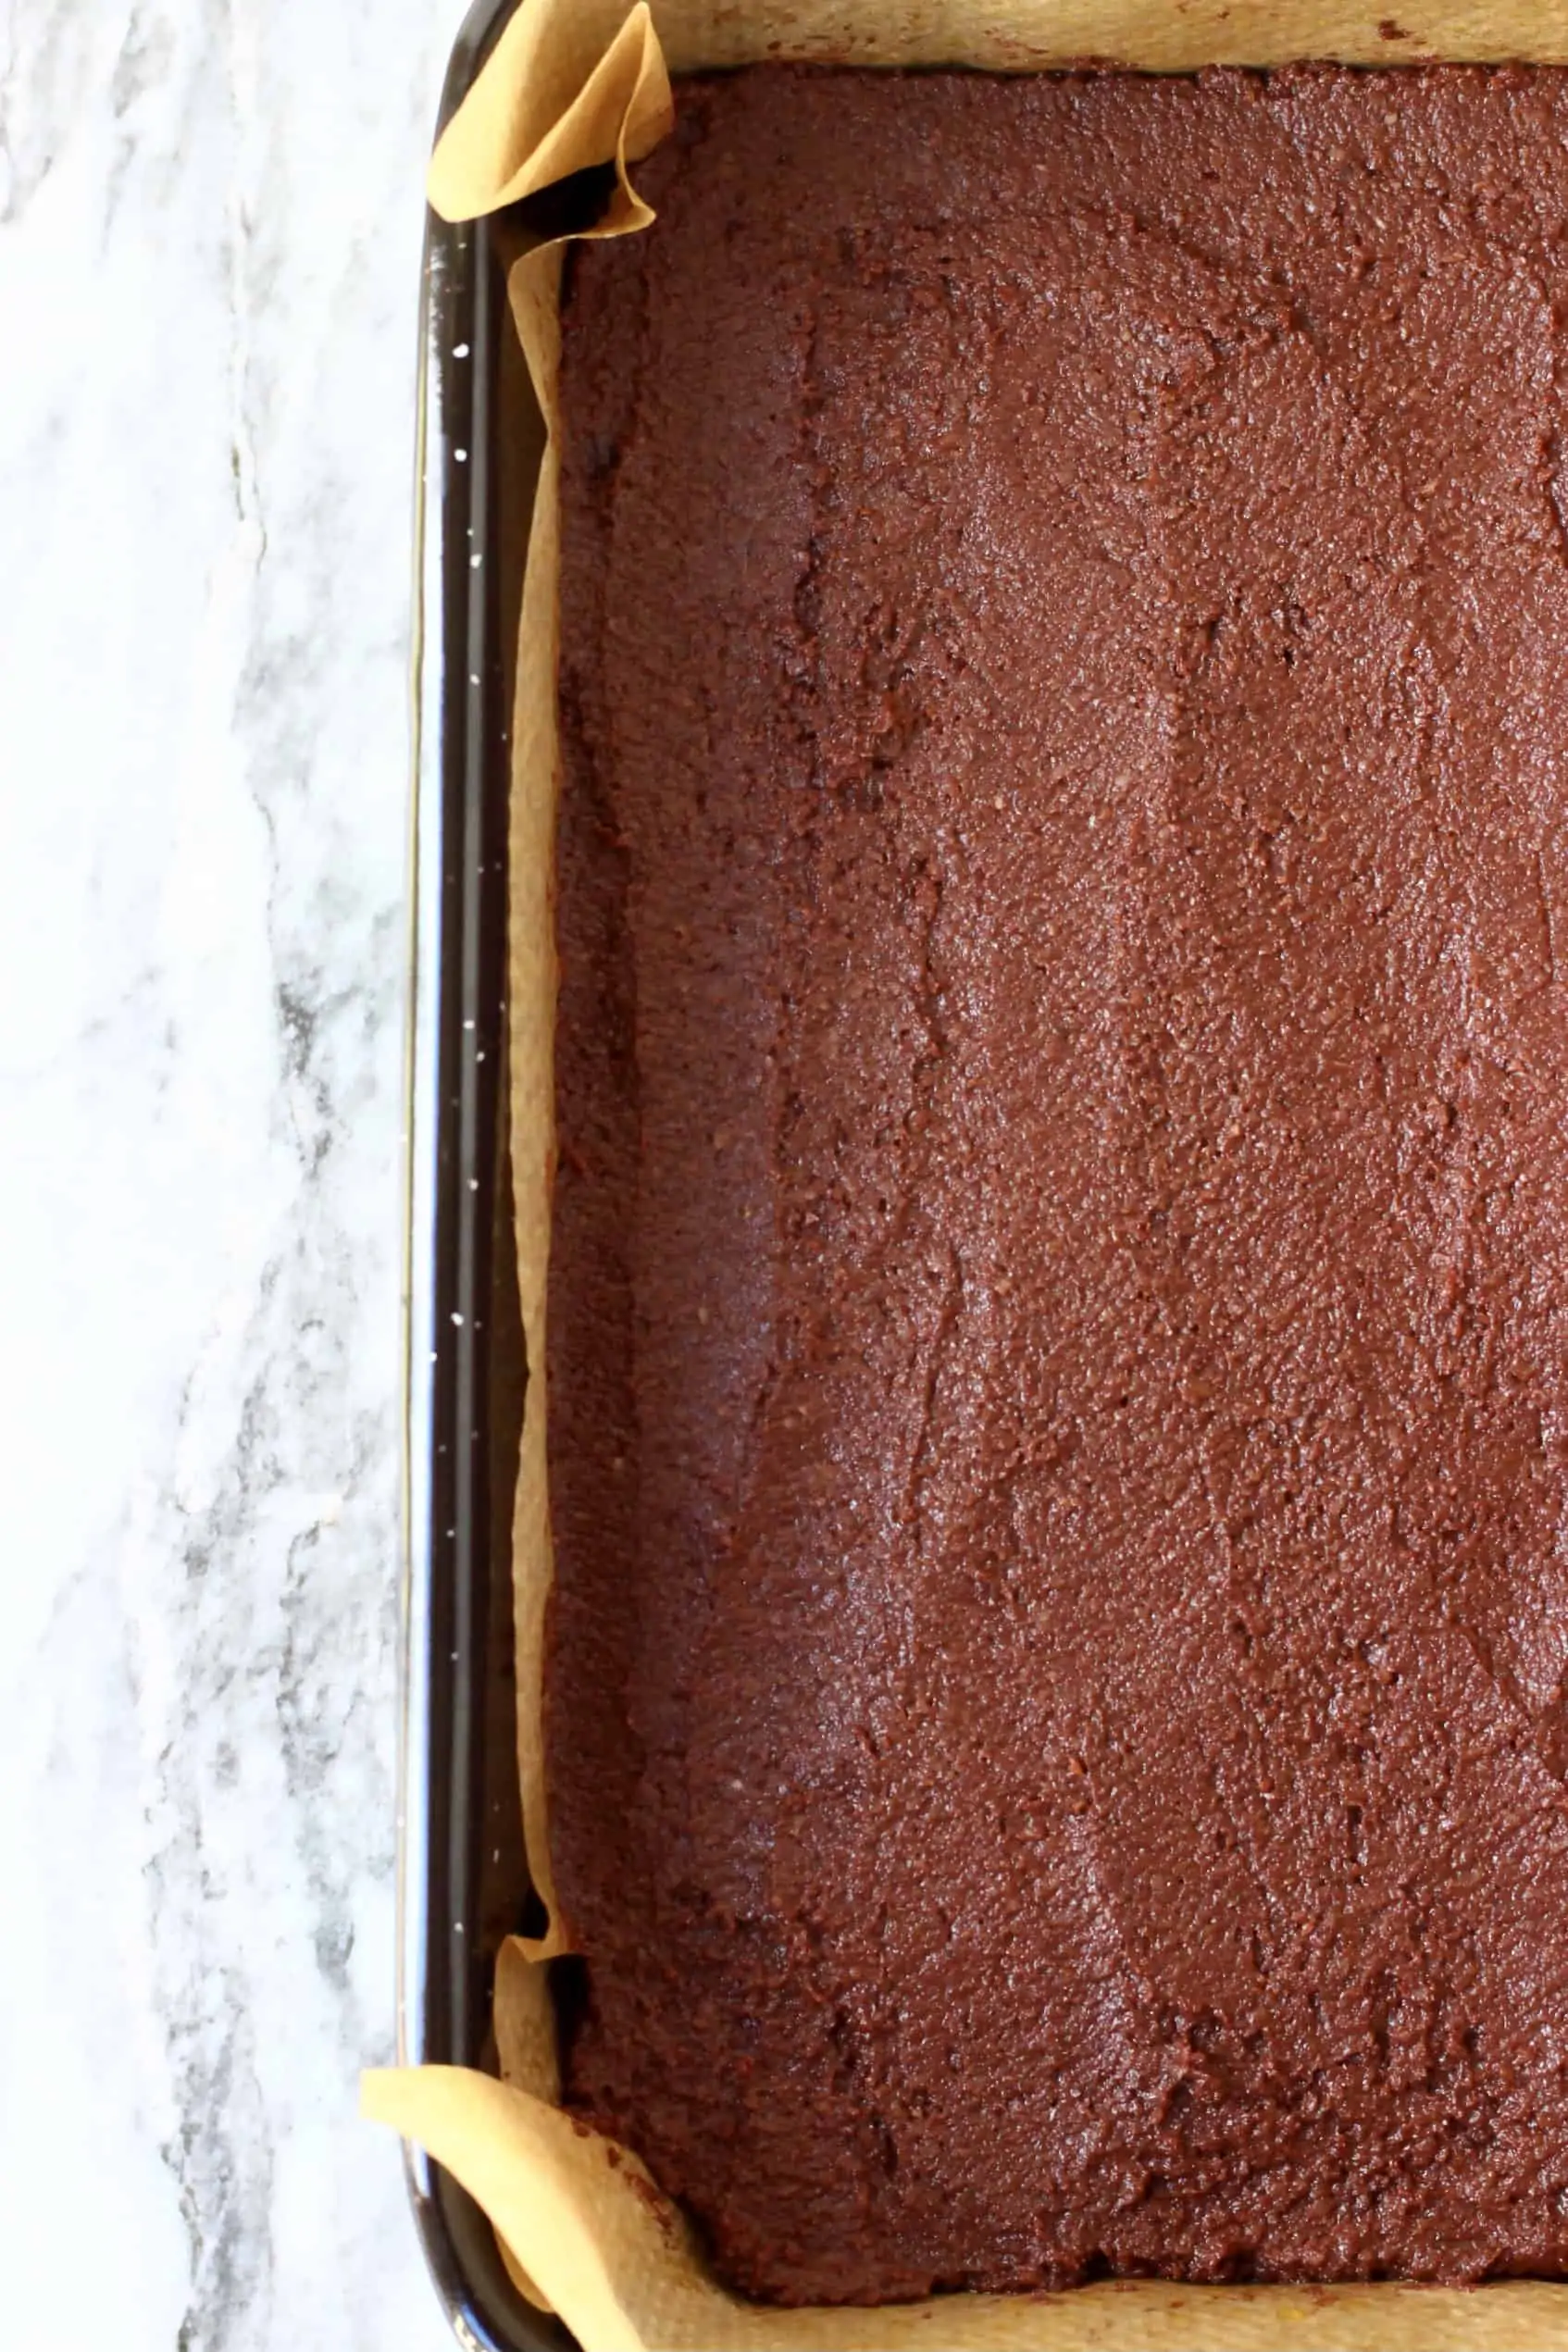 Raw vegan gluten-free chocolate brownie batter in a square baking tin lined with baking paper